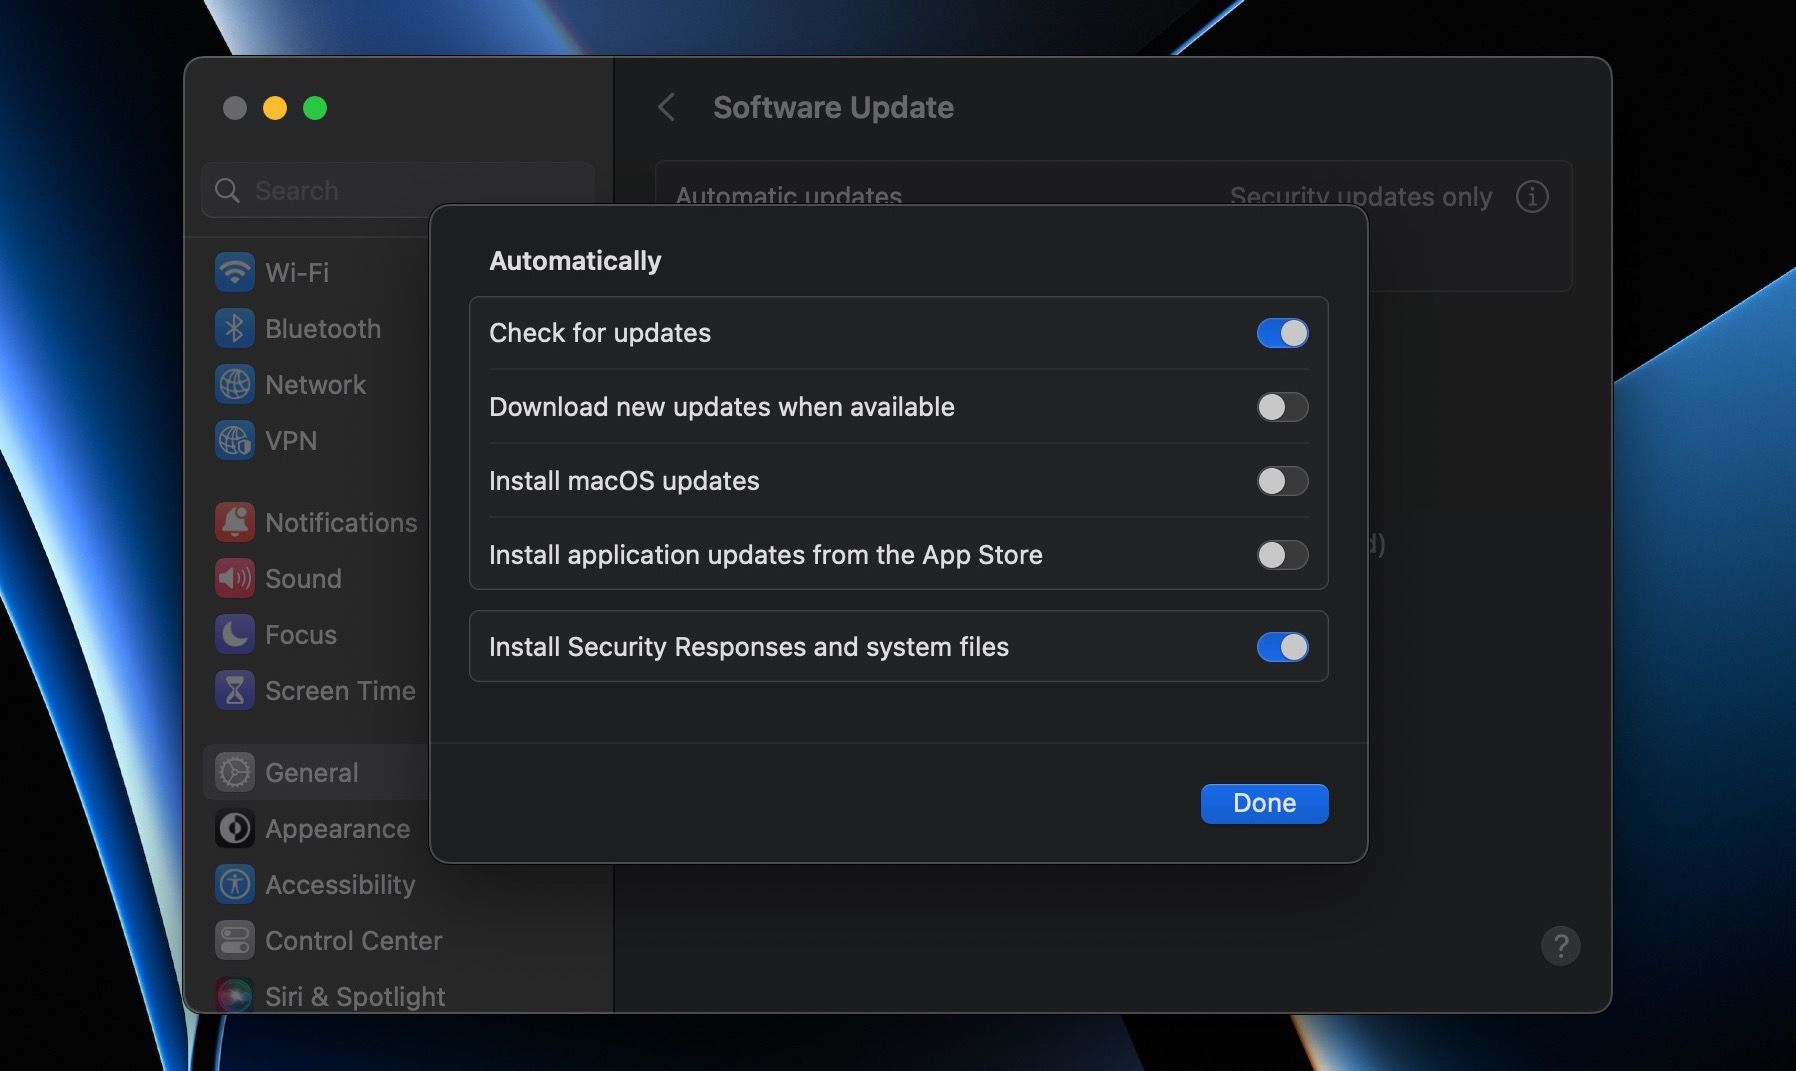 Enable Rapid Security Response Updates from macOS System Settings